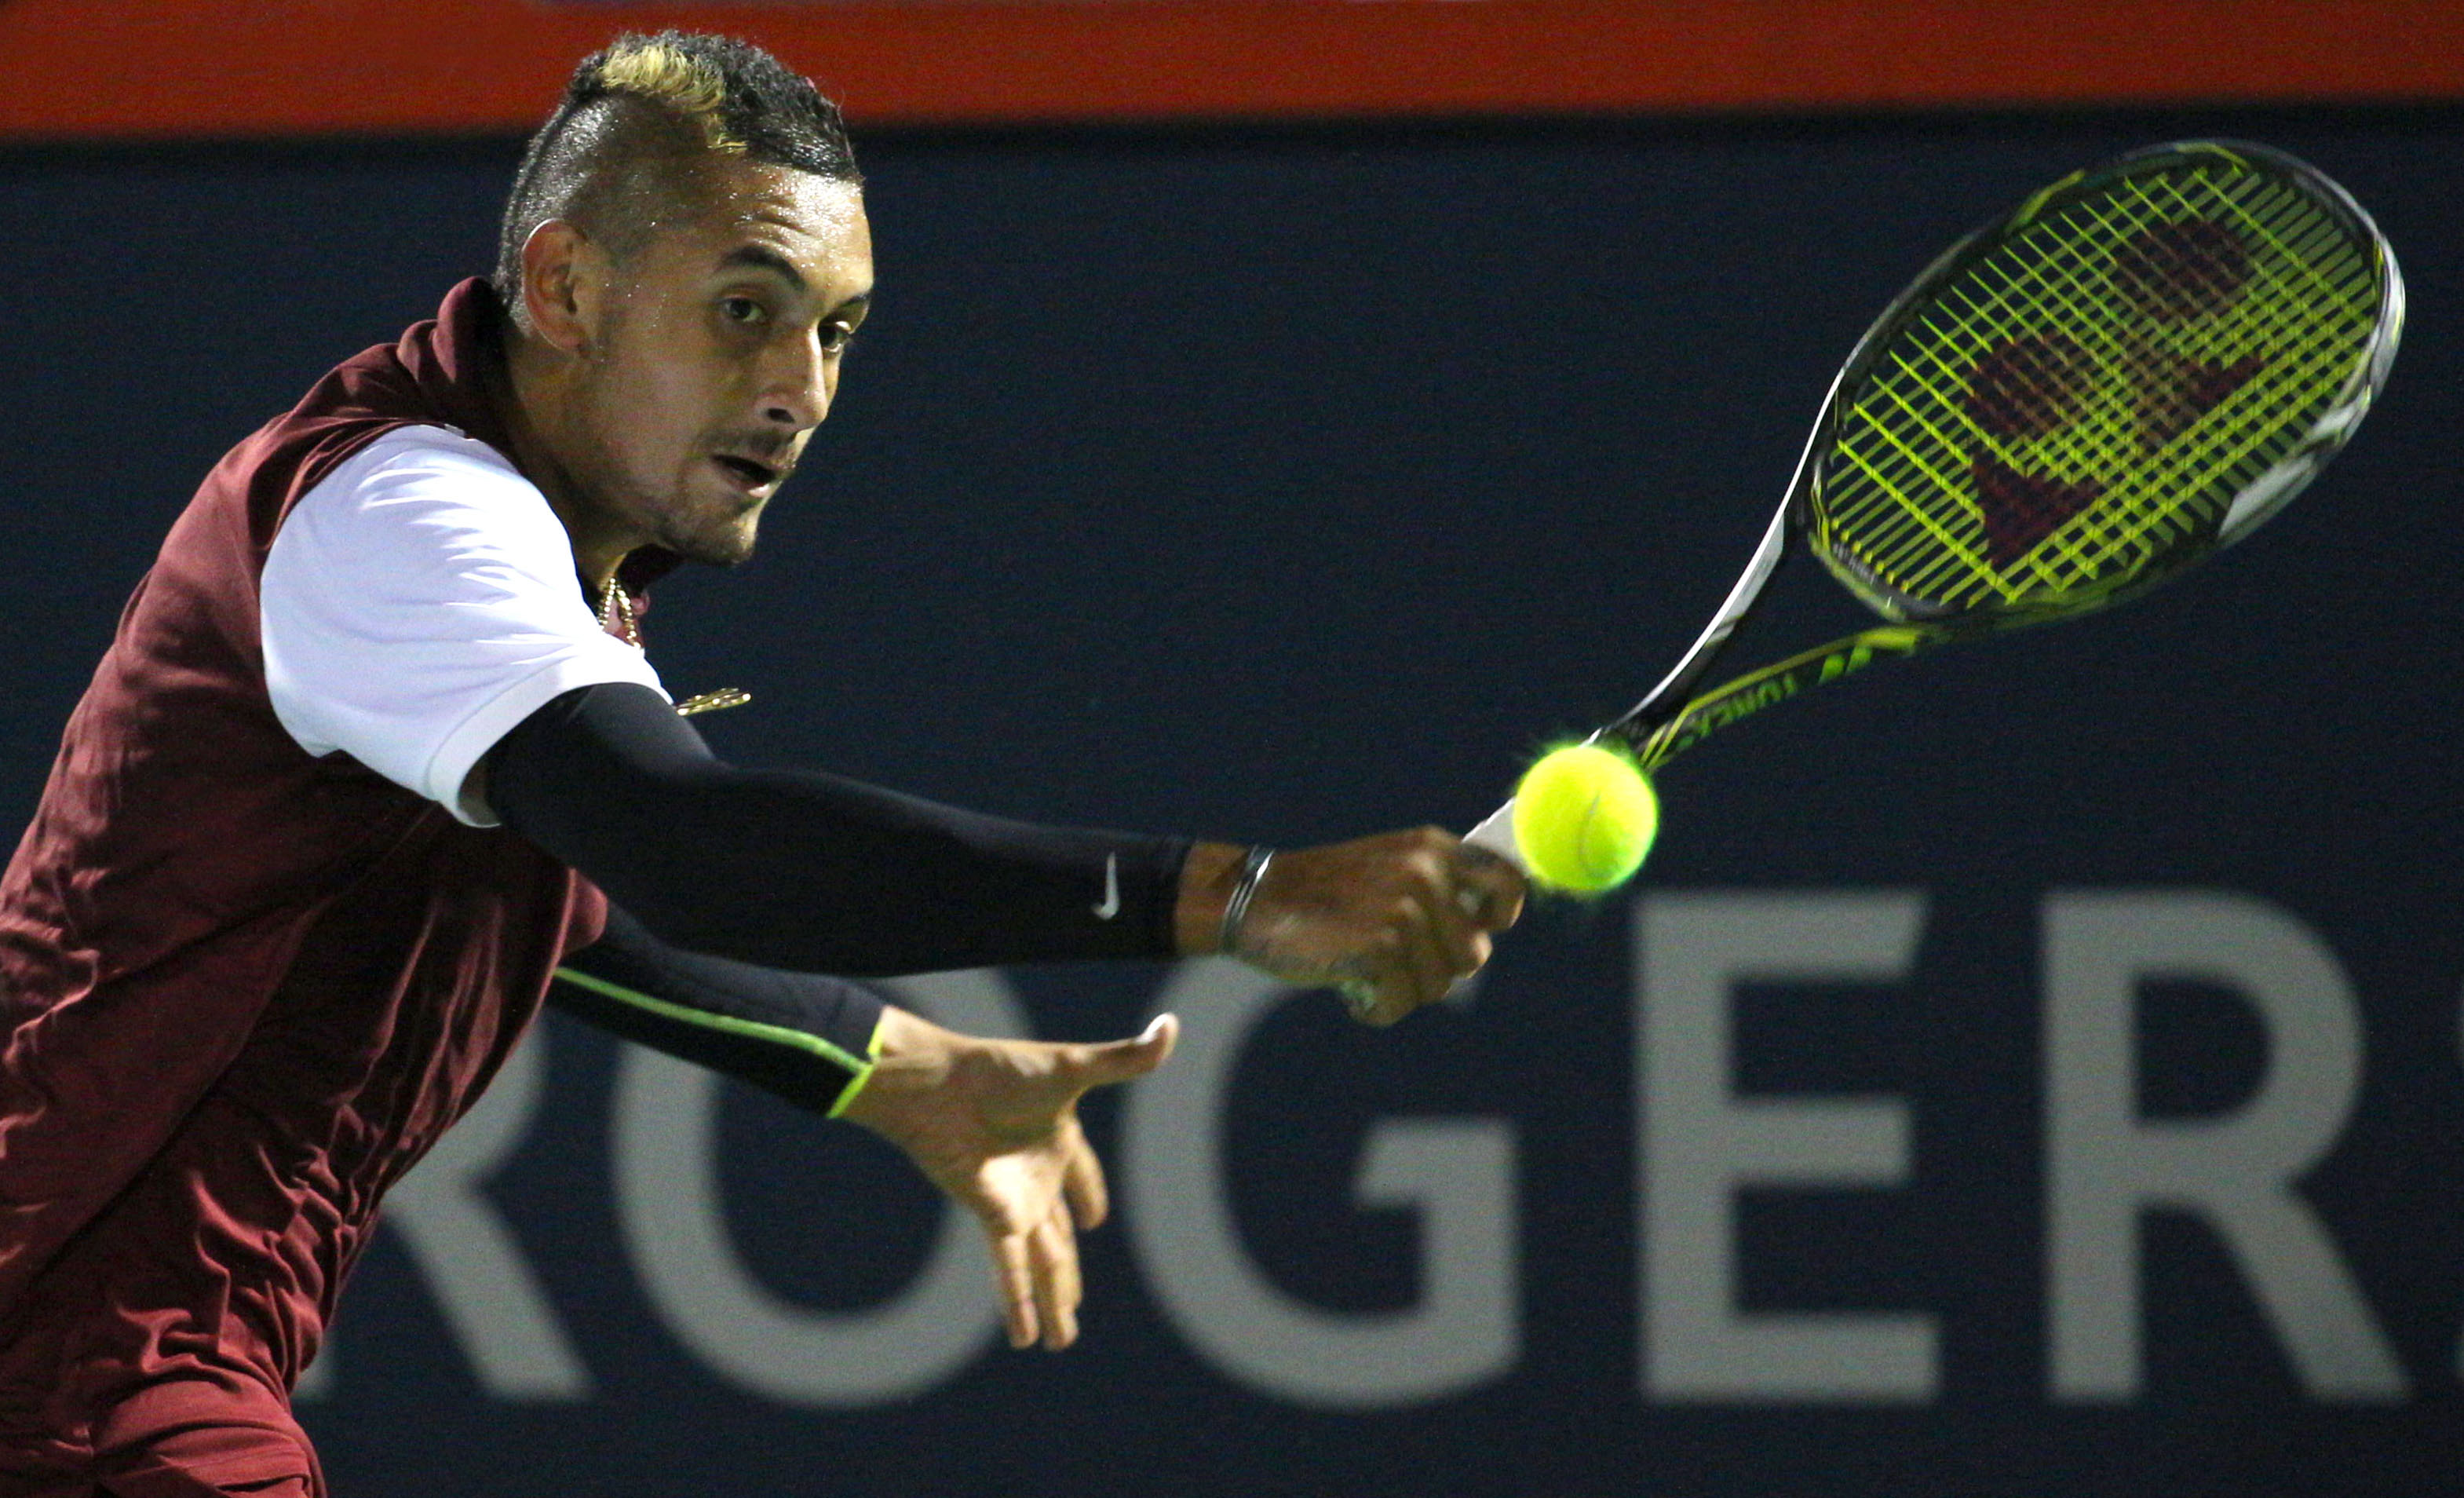 Nick Kyrgios of Australia hits a shot against Stan Wawrinka of Switzerland during the Rogers Cup tennis tournament in Montreal, Quebec, Canada on August 12, 2015. (Jean-Yves Ahern—USA TODAY Sports / Reuters)